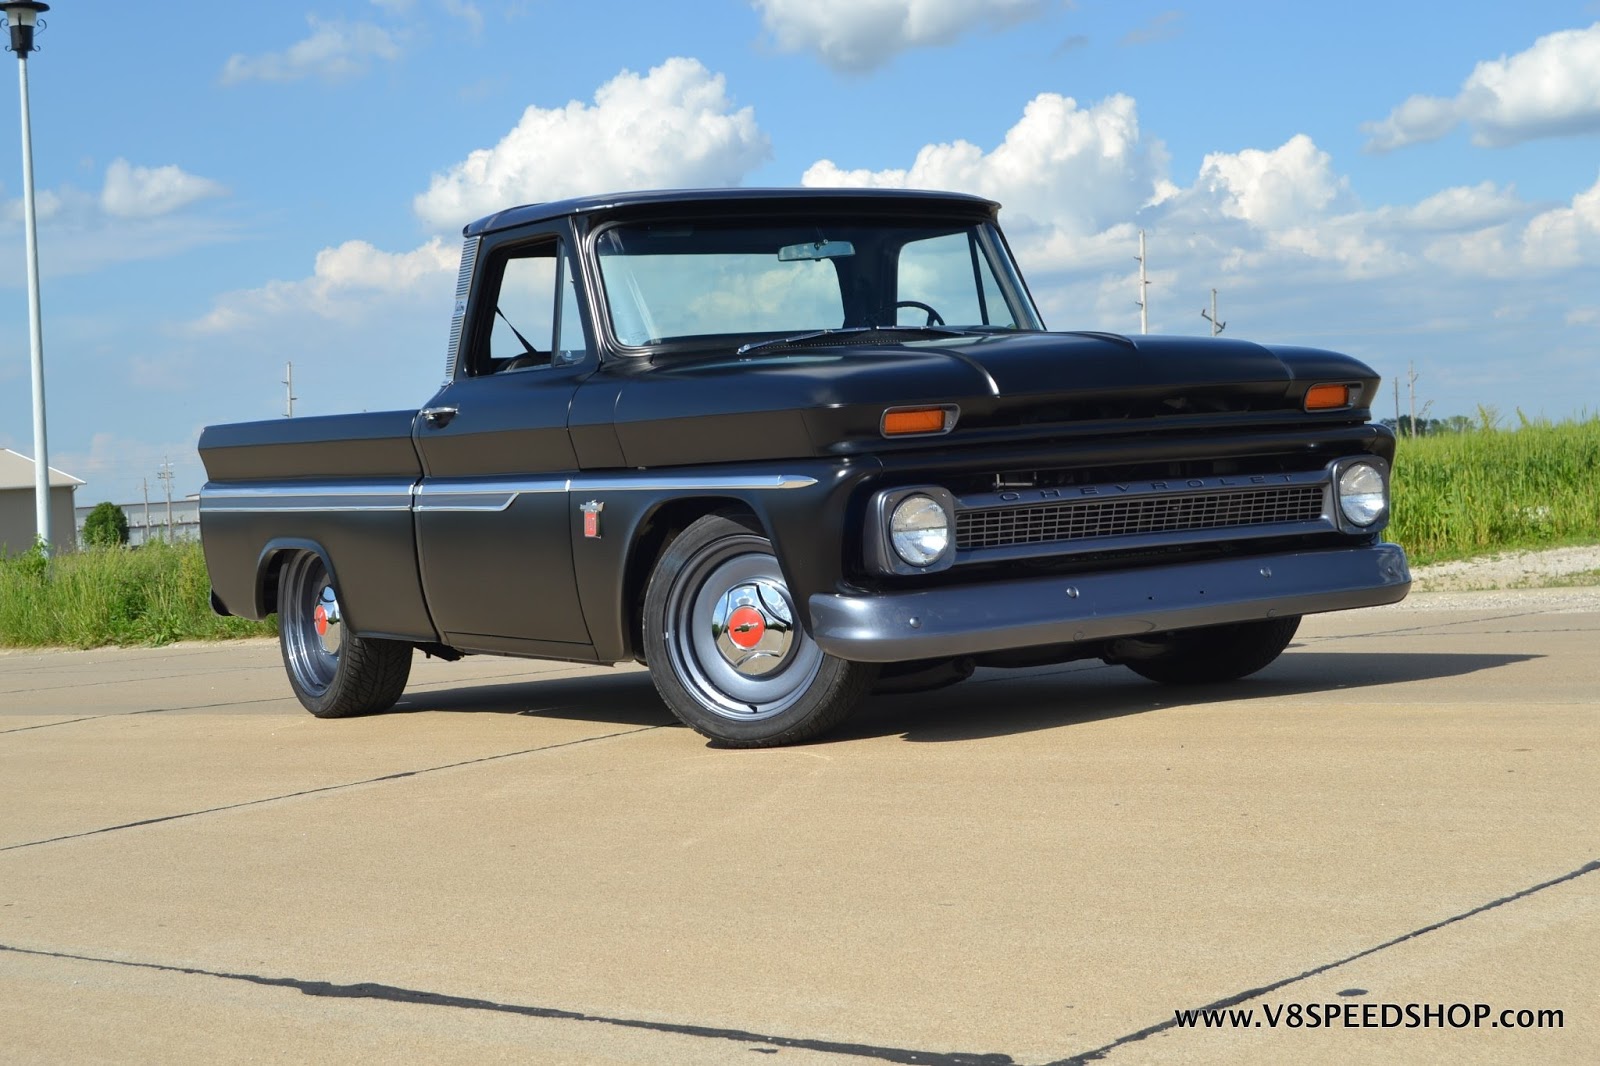 1964 Chevy C-10 with a L92 LSx V8